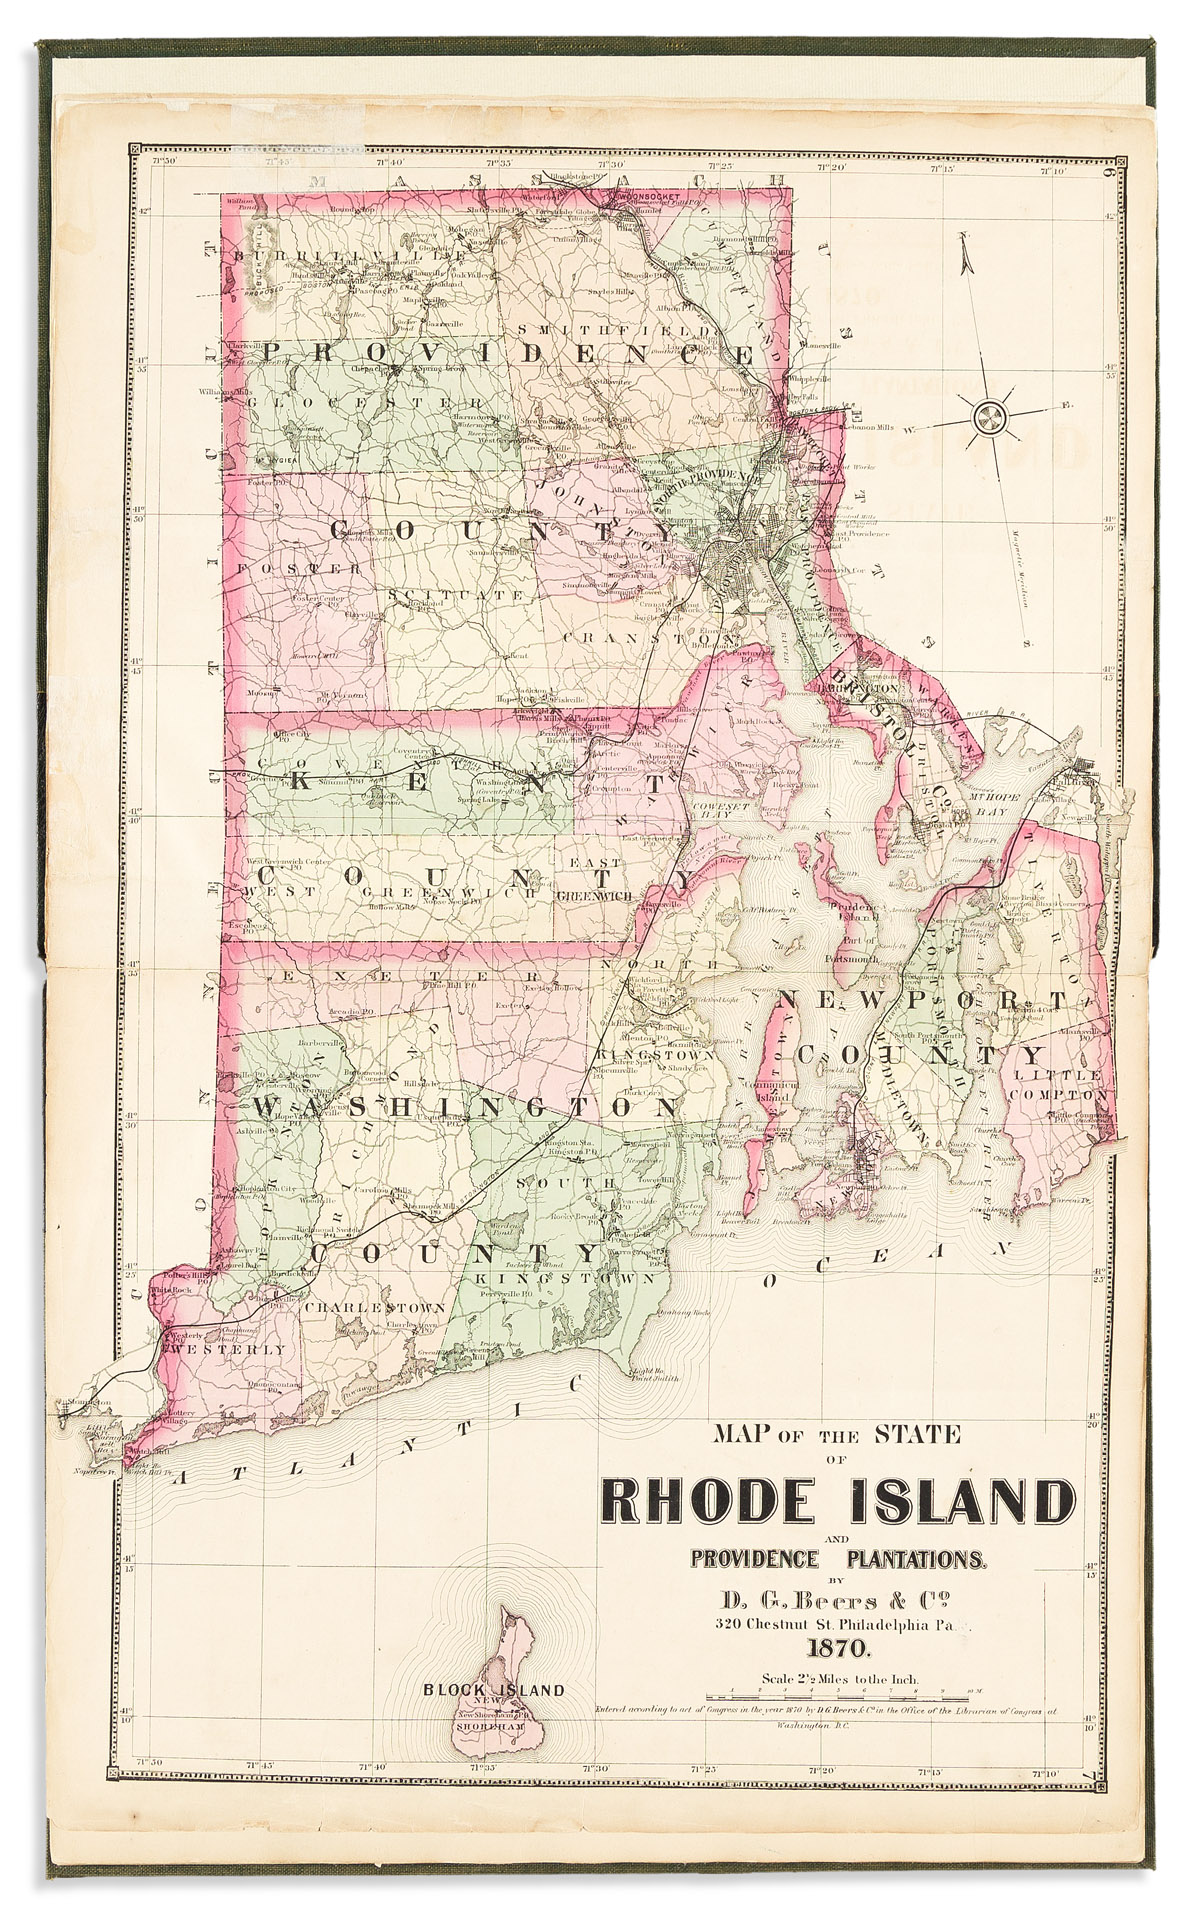 (RHODE ISLAND.) D.G. Beers & Co. Atlas of the State of Rhode Island and Providence Plantations.